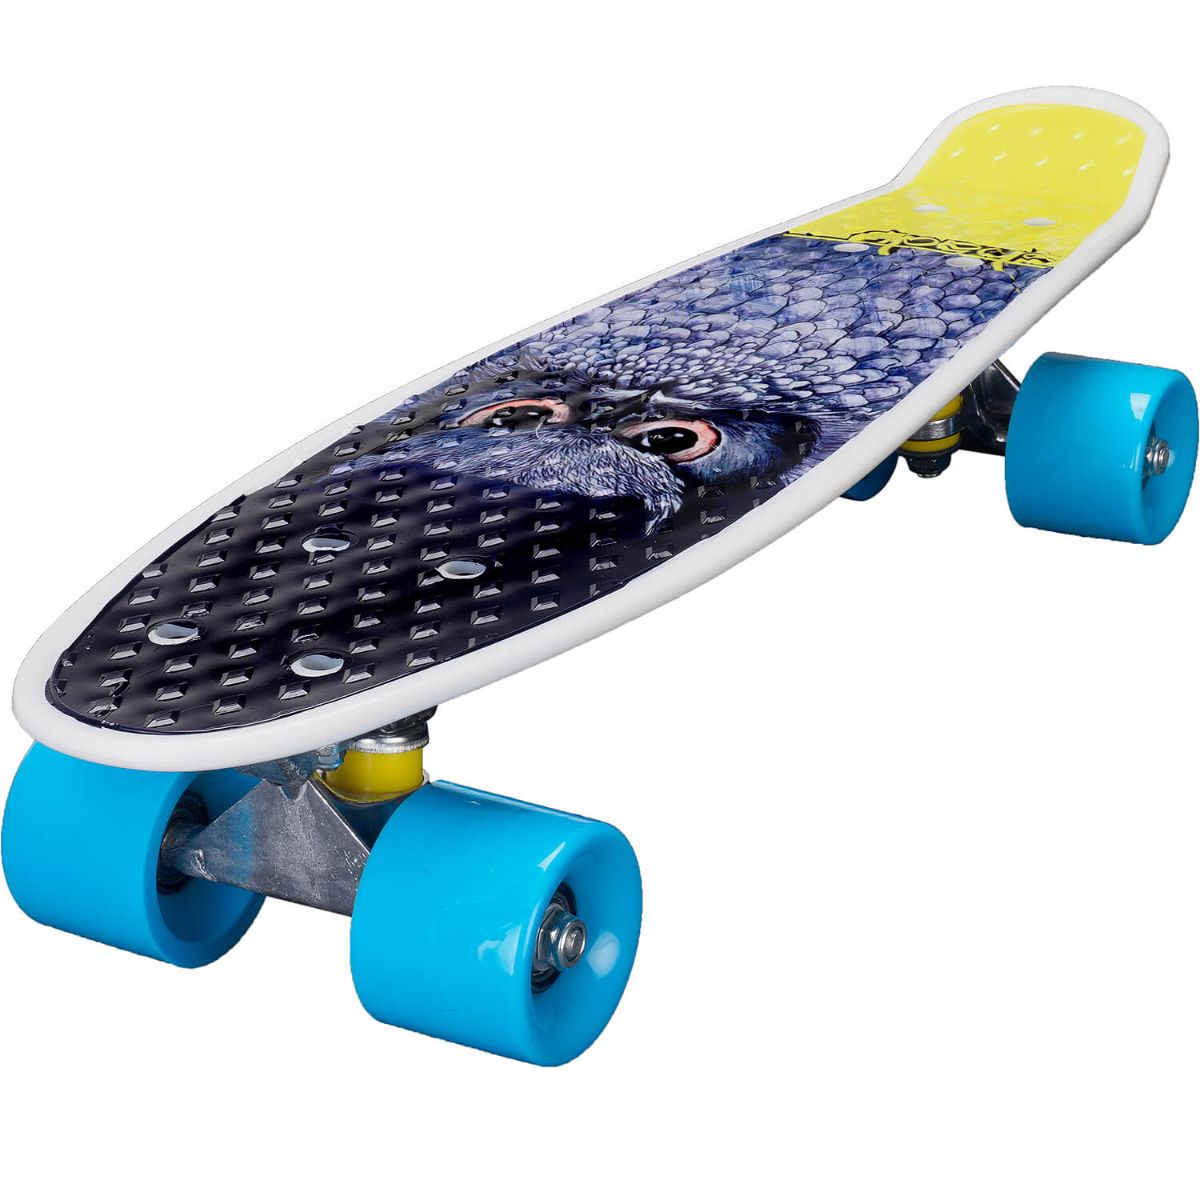 Penny board Action One, 22 ABEC-7 PU, Aluminium Truck, Blue Owl Action One